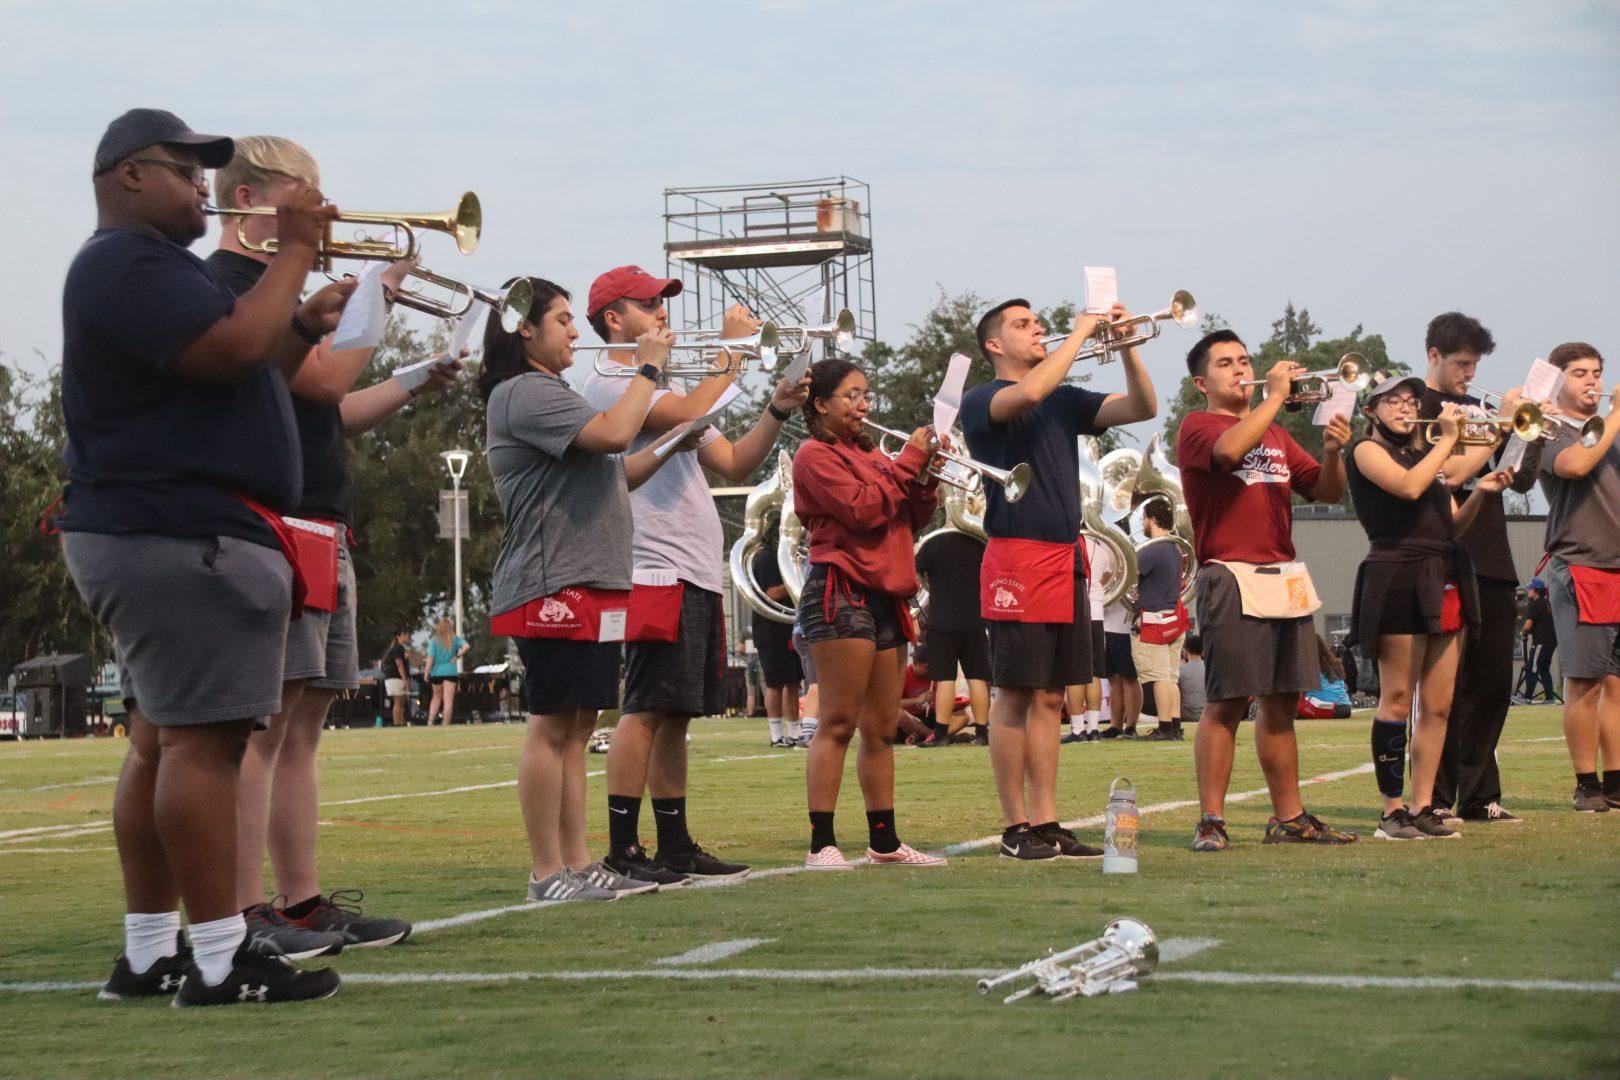 Fresno+States+Bulldog+Marching+Band+returns+to+campus+for+practice+after+a+two+year+hiatus.+%28Kameron+Thorn%2FThe+Collegian%29